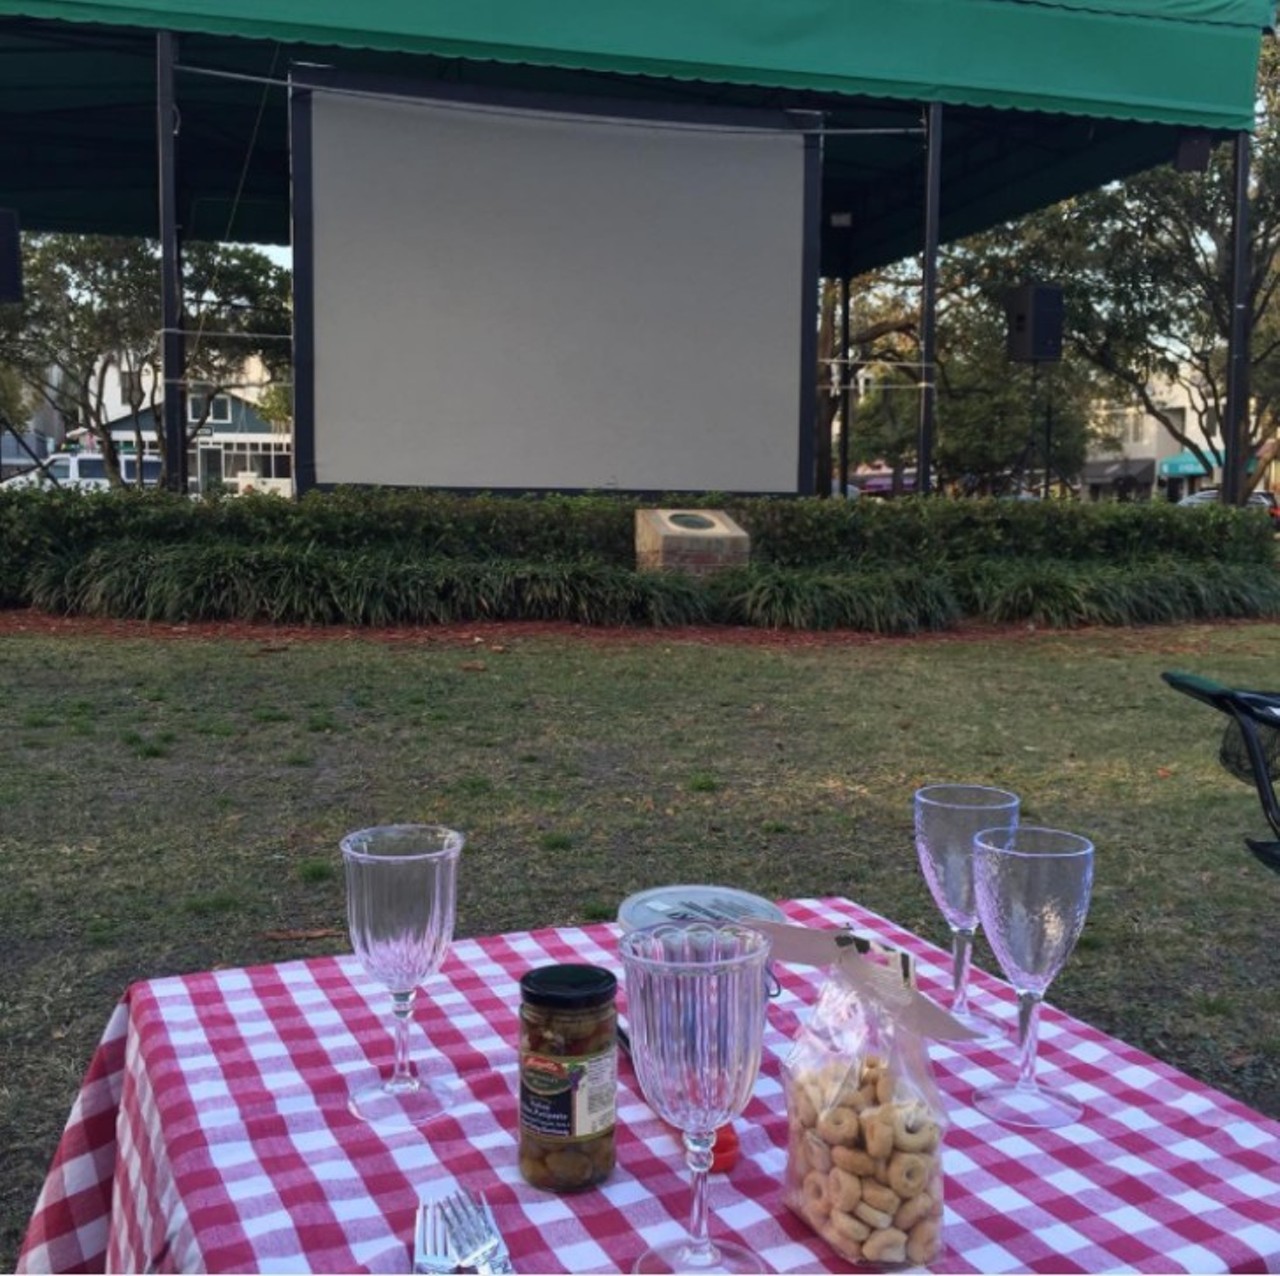 Popcorn Flicks in the Park
7 or 8 p.m. on every second Thursday of each month, Central Park in Winter Park
How can one find the gumption to say no to a free movie in the park and follow it with a life lived fully? You cannot, in short, so snag your friends and fam and check out this monthly treat for the active public.
Photo via theromanticvineyard/Instagram